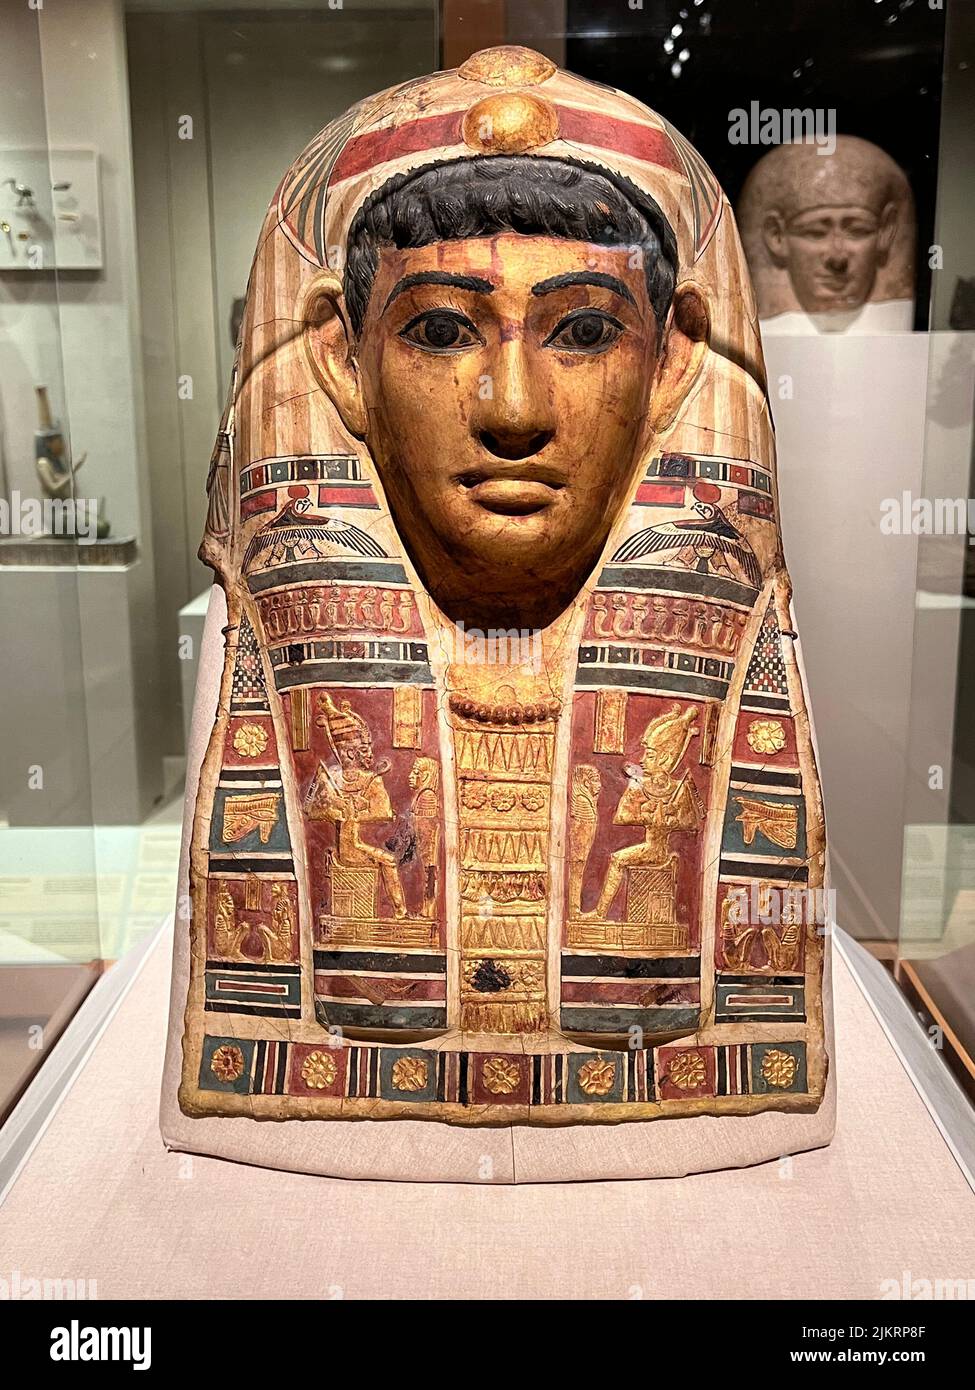 Mummy Mask of a Man, Stucco, gilded and painted, Roman Period, early 1st century C.E. Egypt:      Egyptian men living under Roman rule used mummy masks that combined contemporary and traditional elements. This example features locks of wavy black hair, a Roman fashion at this time. Stock Photo